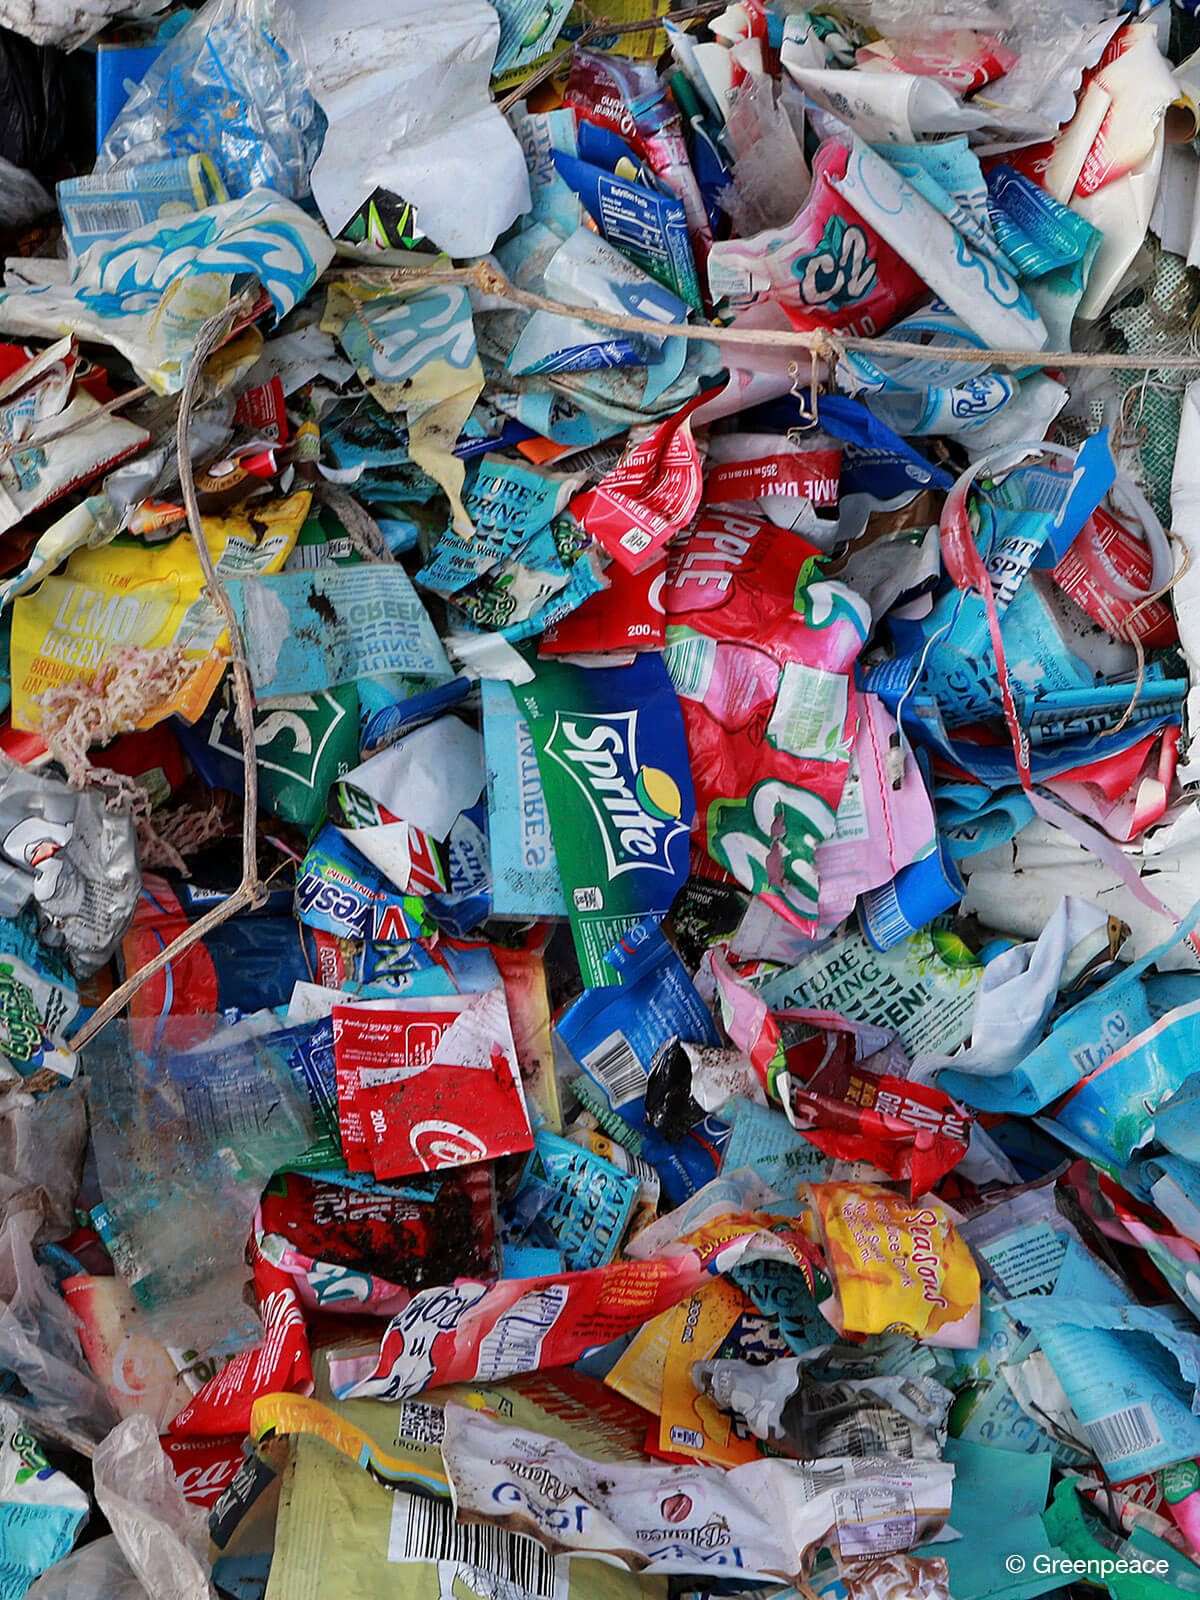 Single-use plastic packaging increases food waste, pollution